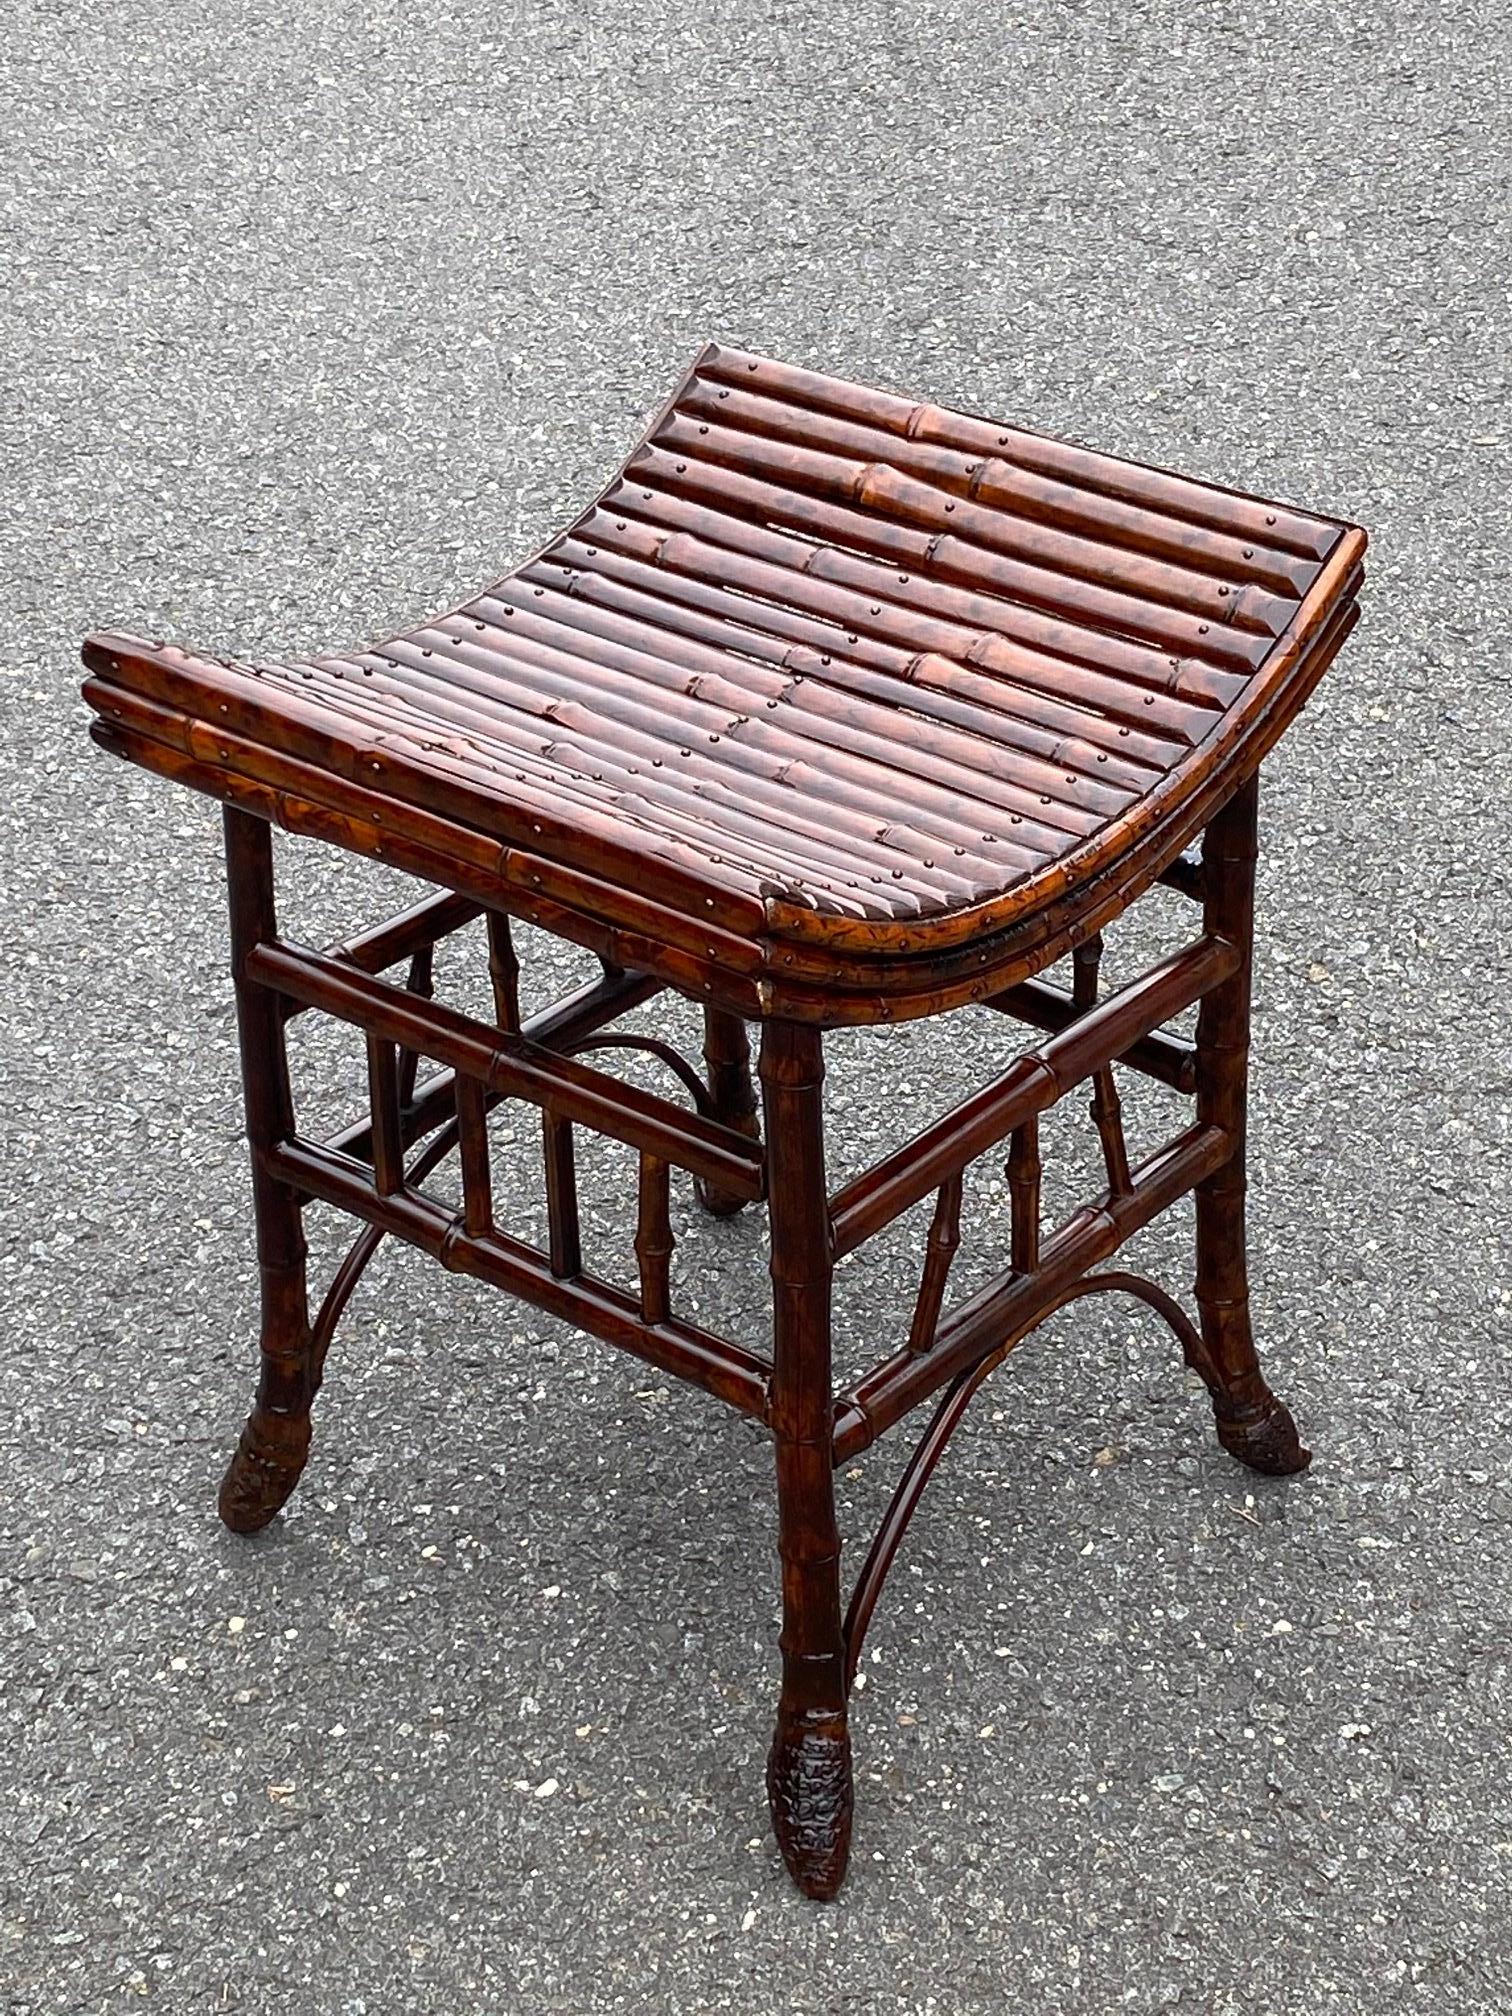 Beautiful antique bamboo bench or stool from England having a warm faux tortoise finish and lovely curved seat.

           